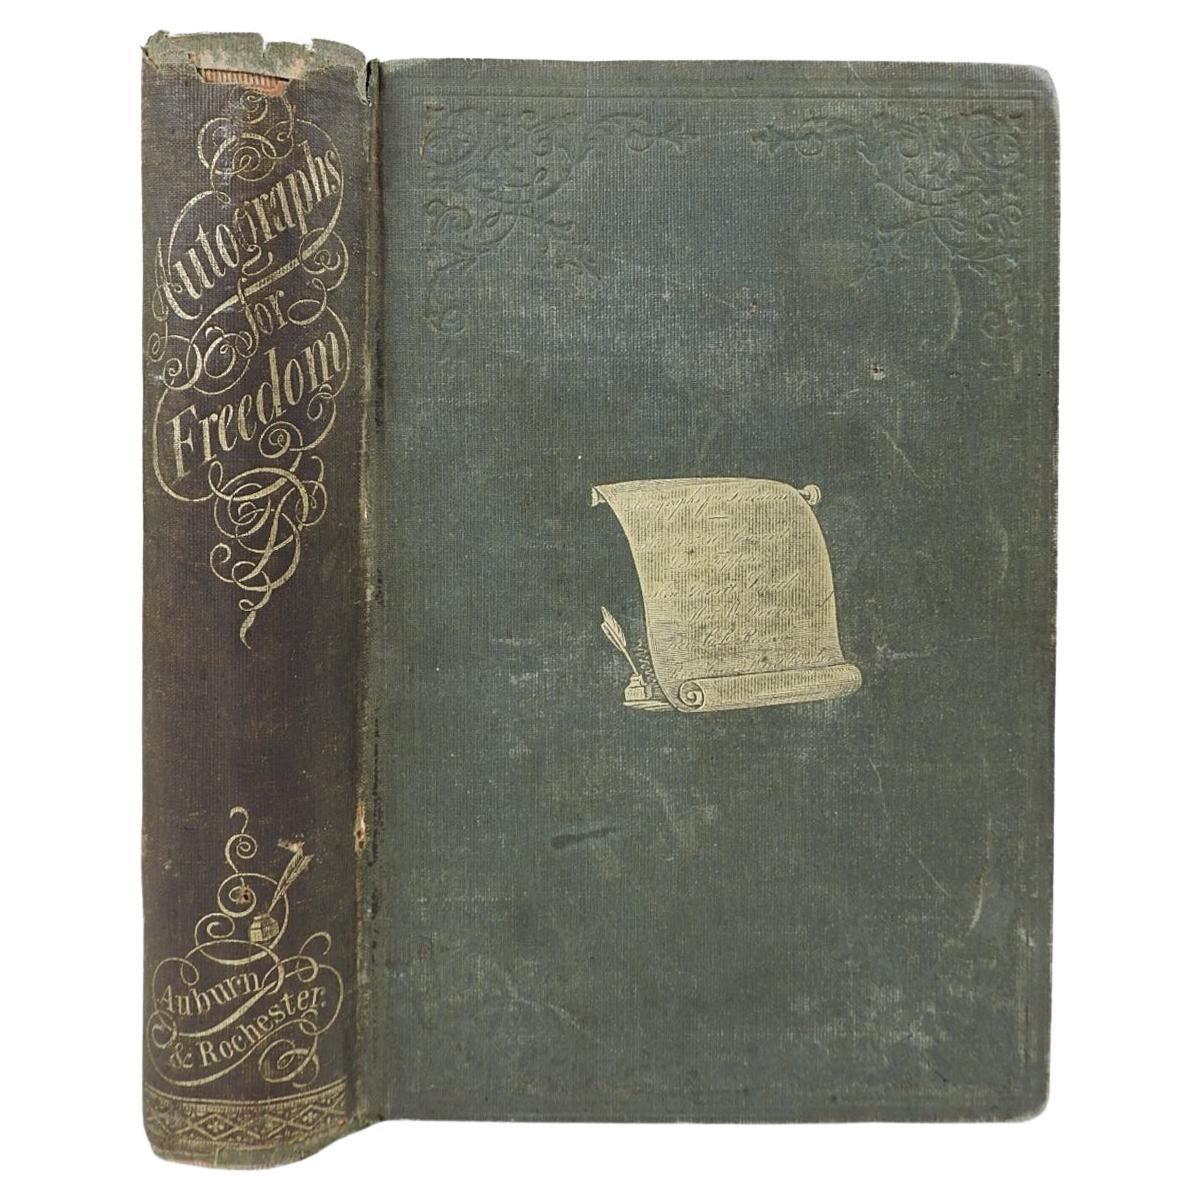 1854 Autographs for Freedom Abolitionist Book For Sale